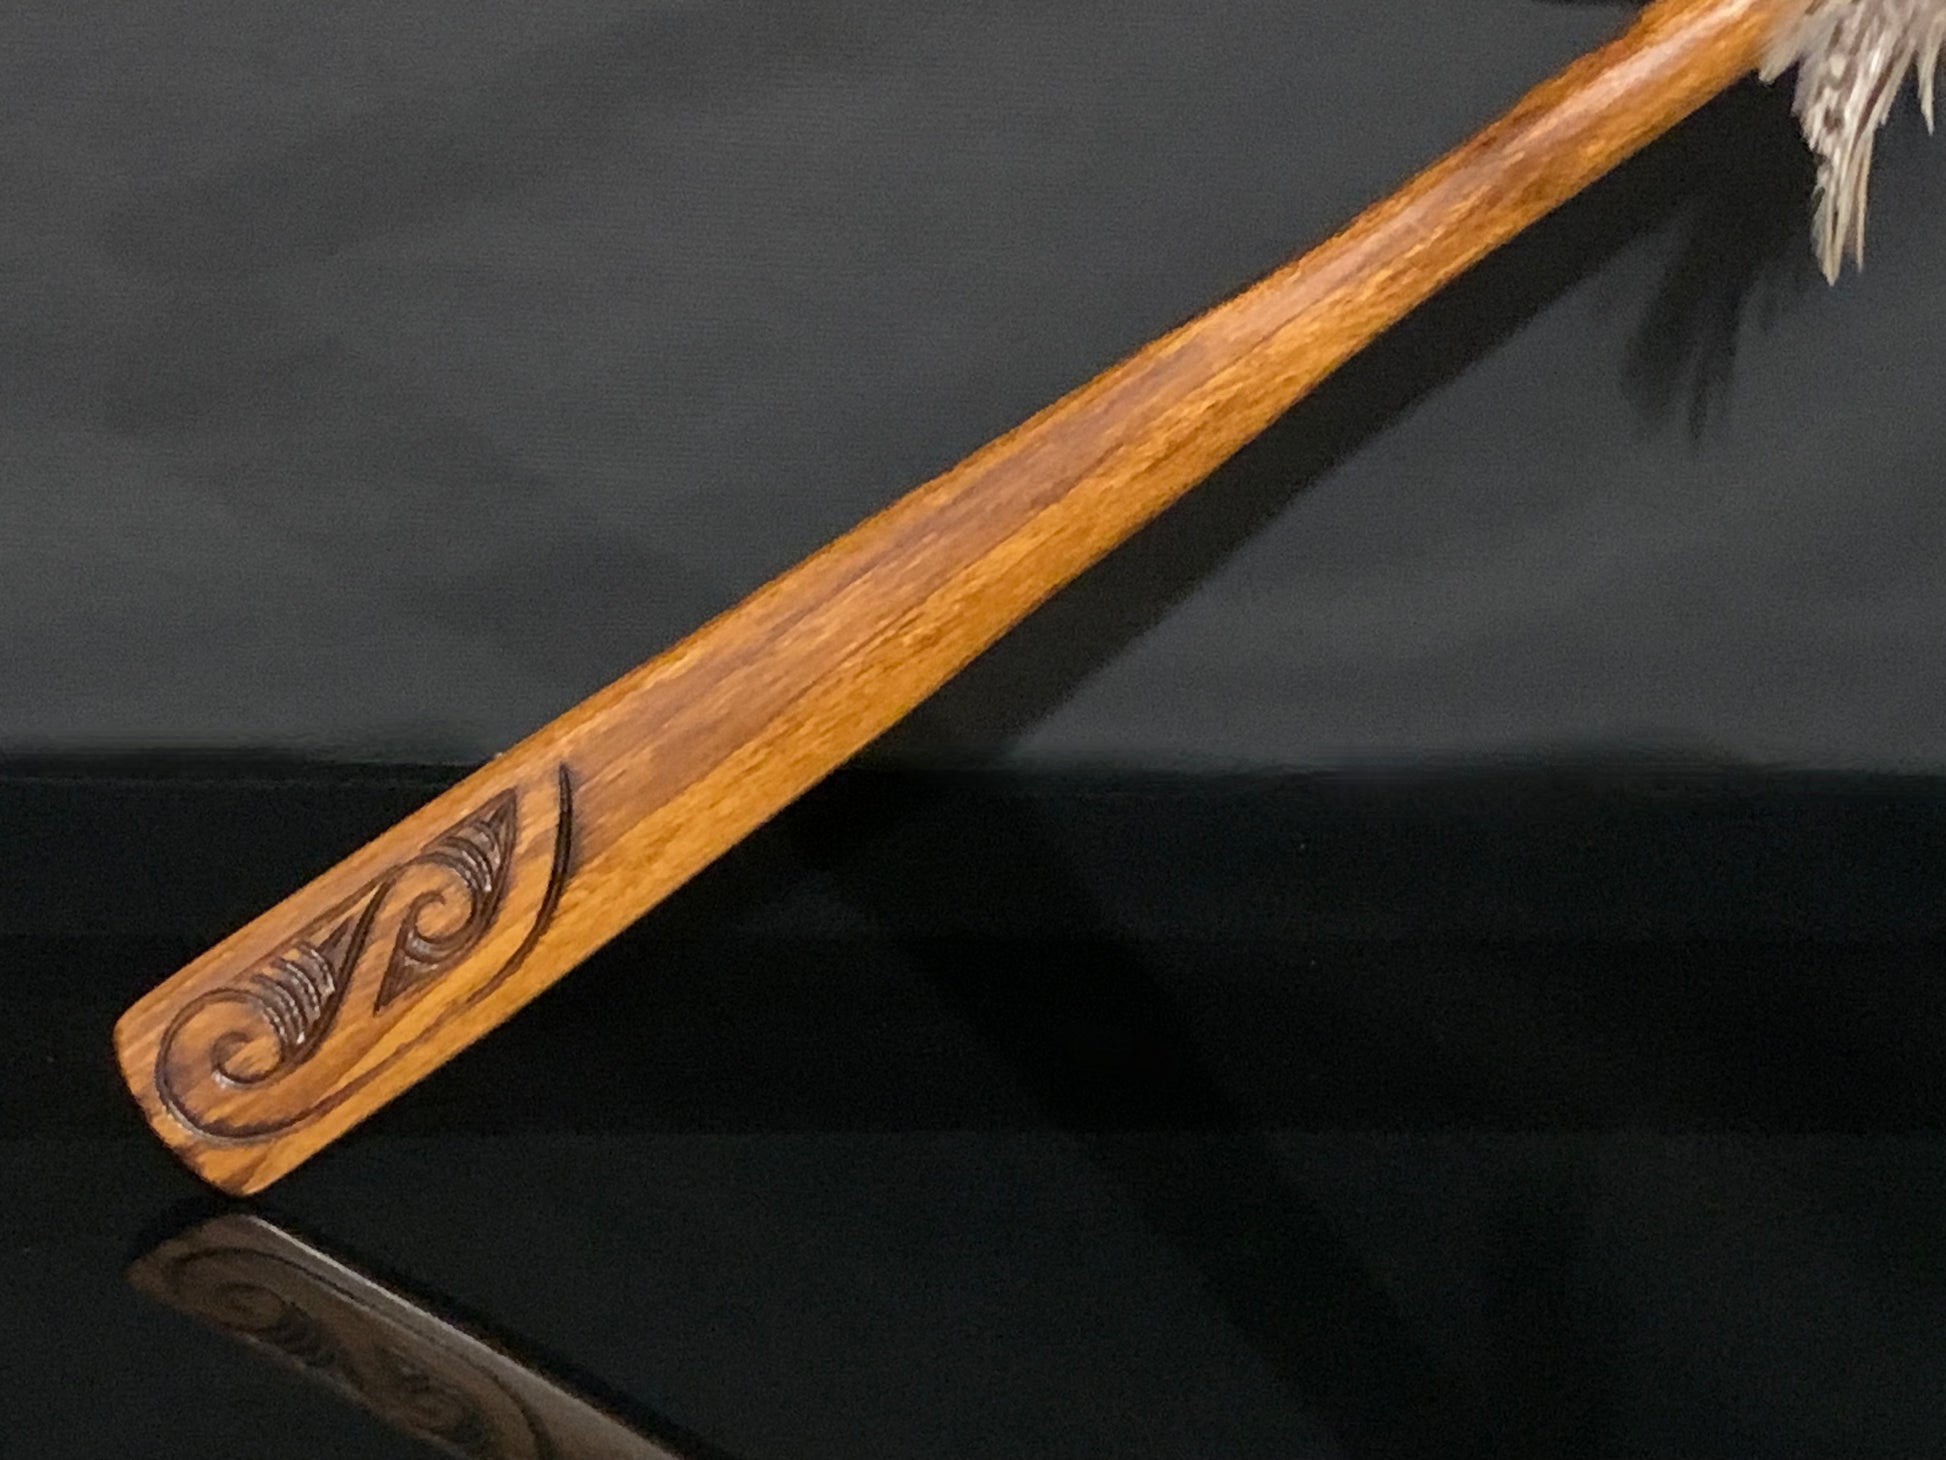 carving on handle from  taiaha weapon carved in New Zealand and available from Silver Fern Gallery